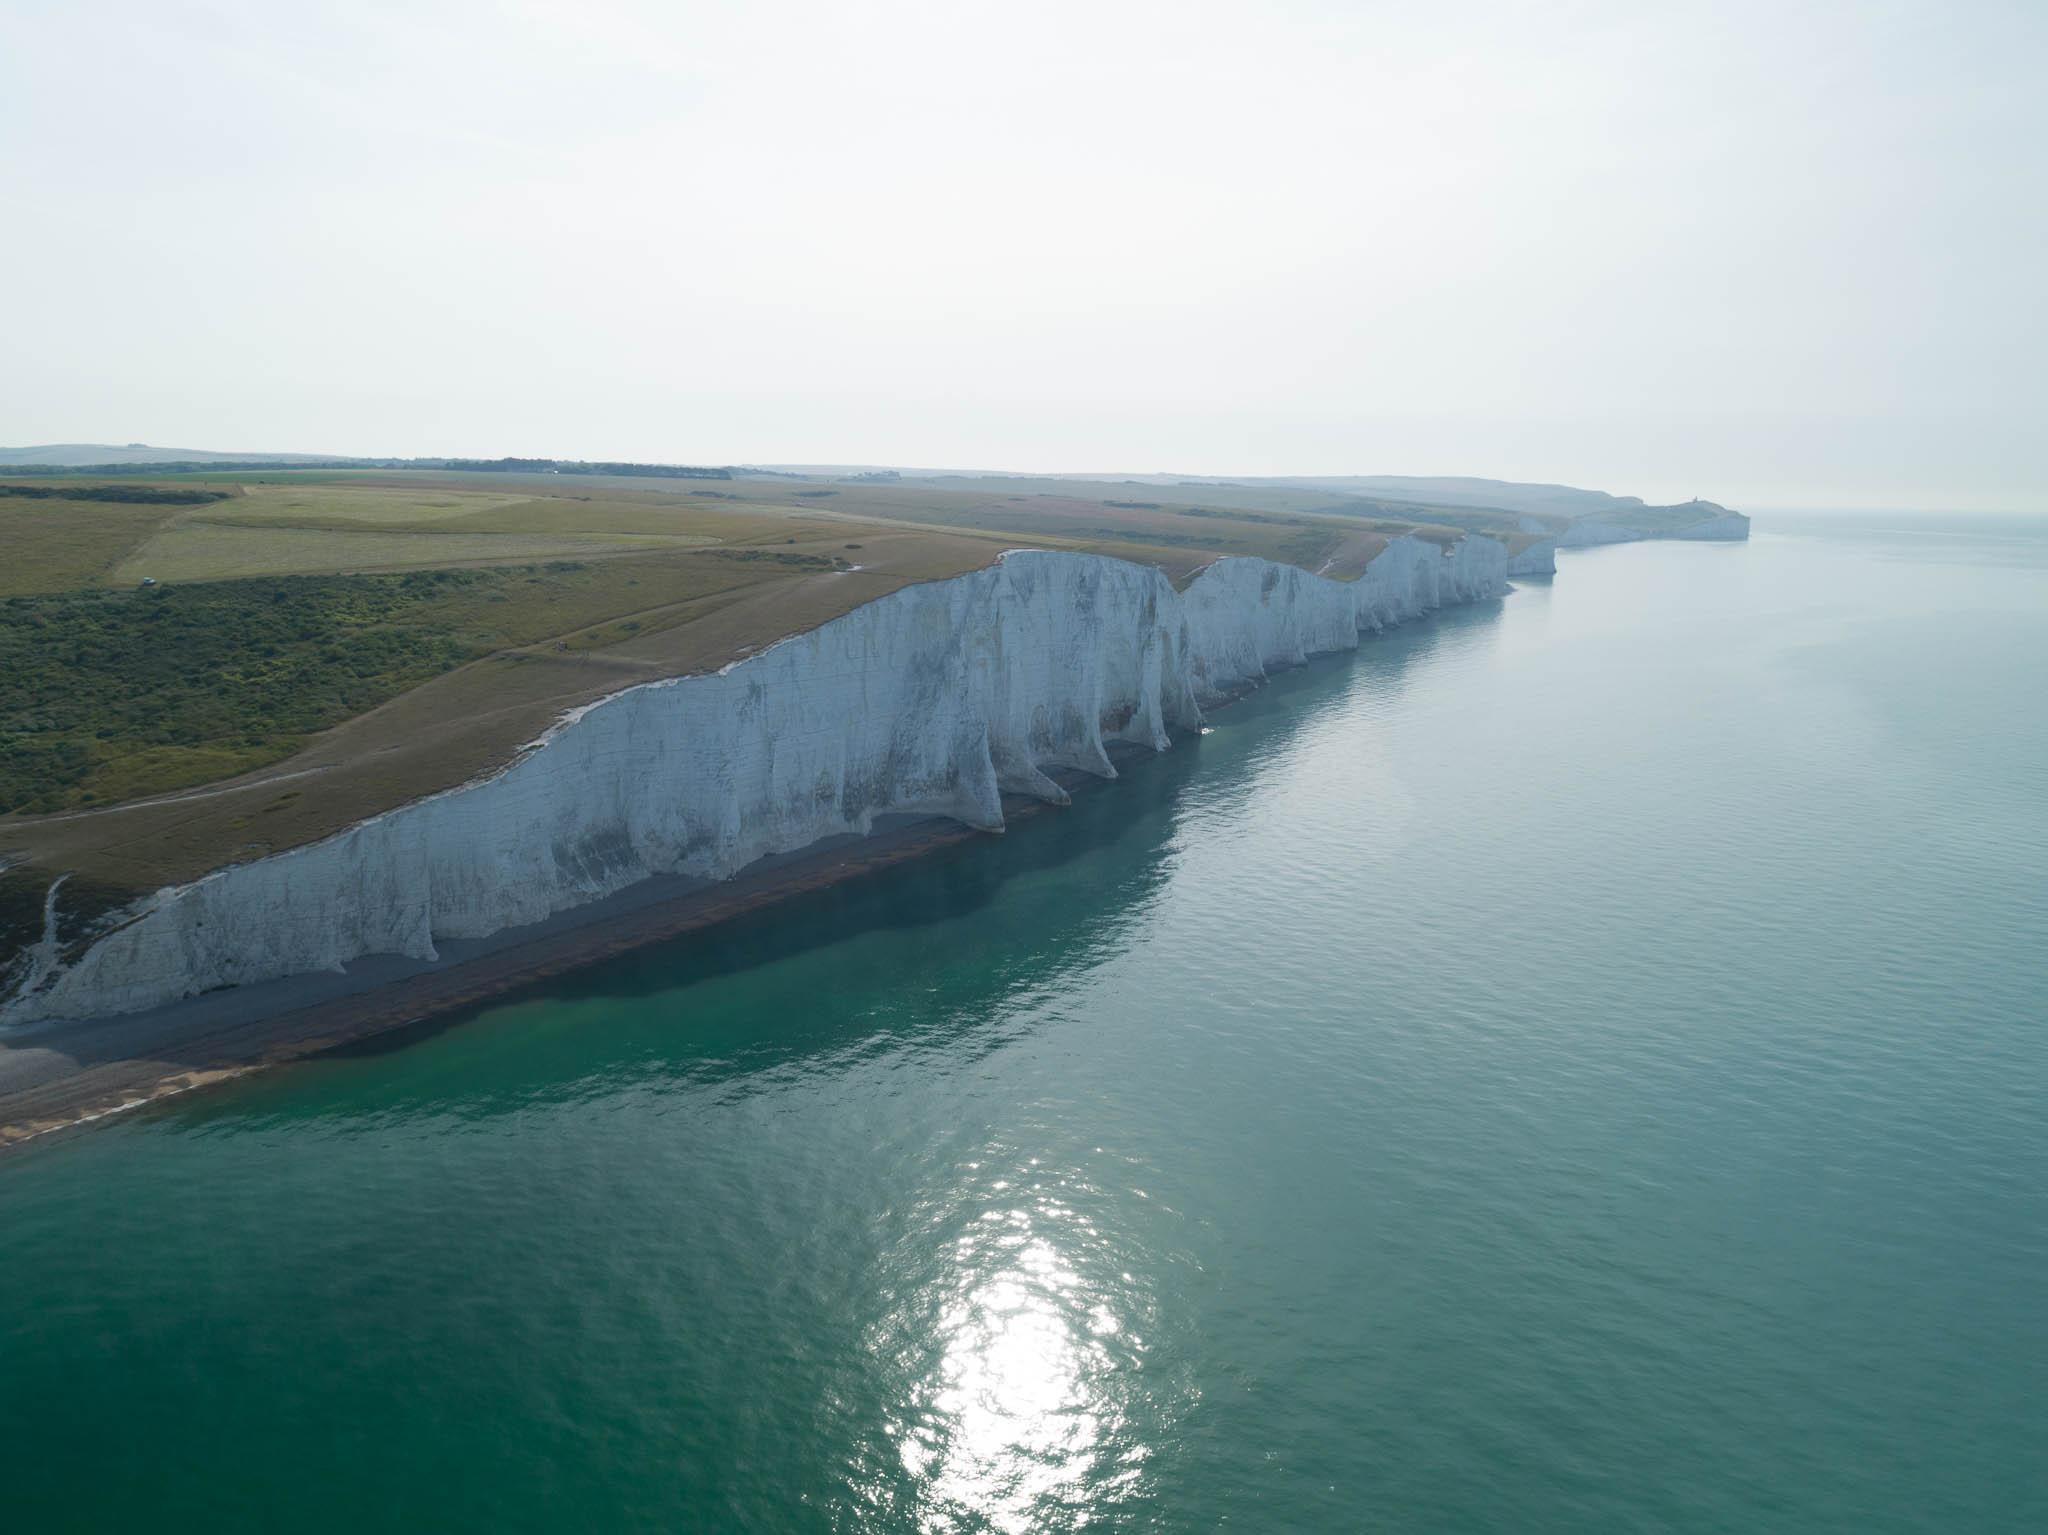 Seven Sisters cliffs in England, taken from a drone